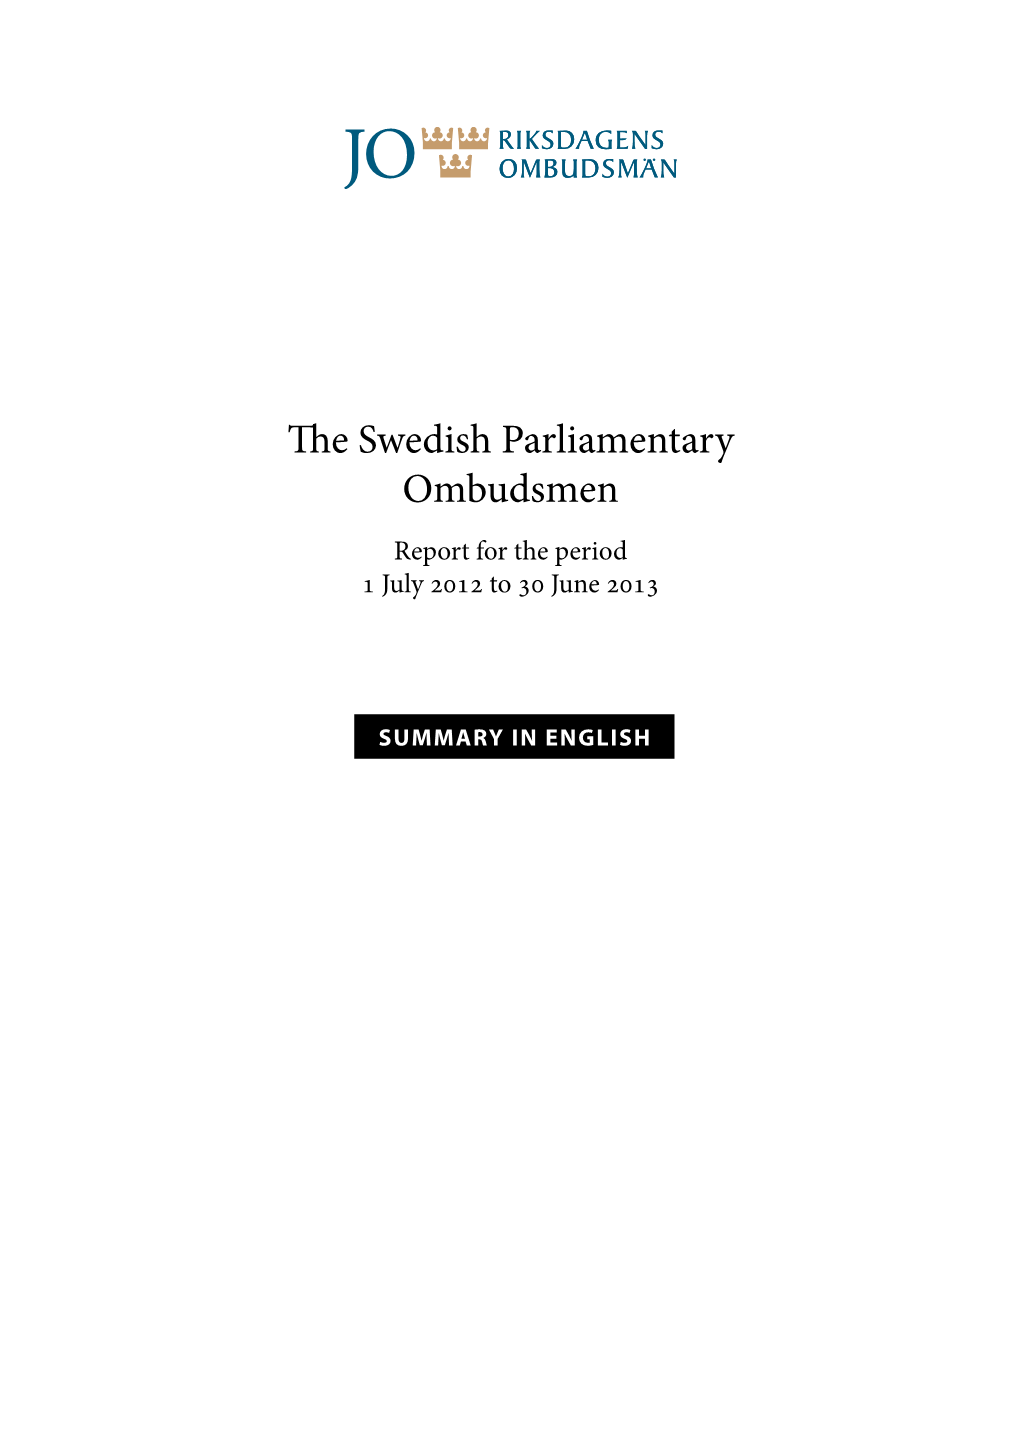 The Swedish Parliamentary Ombudsmen Report for the Period 1 July 2012 to 30 June 2013